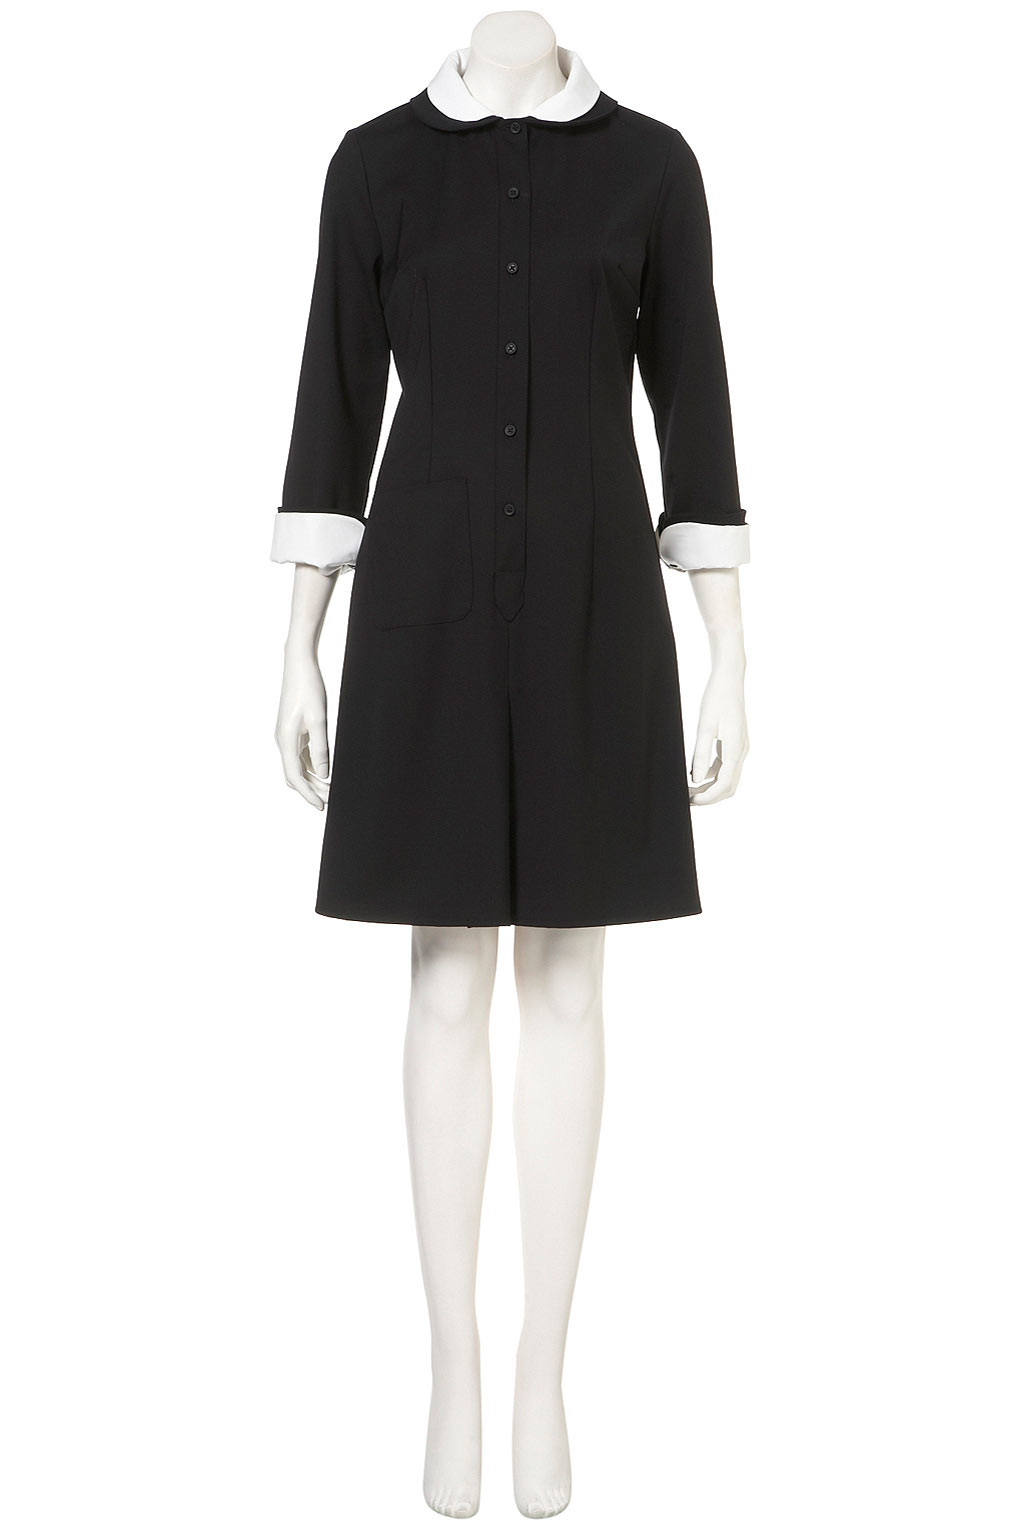 TOPSHOP French Maids Dress in Black - Lyst